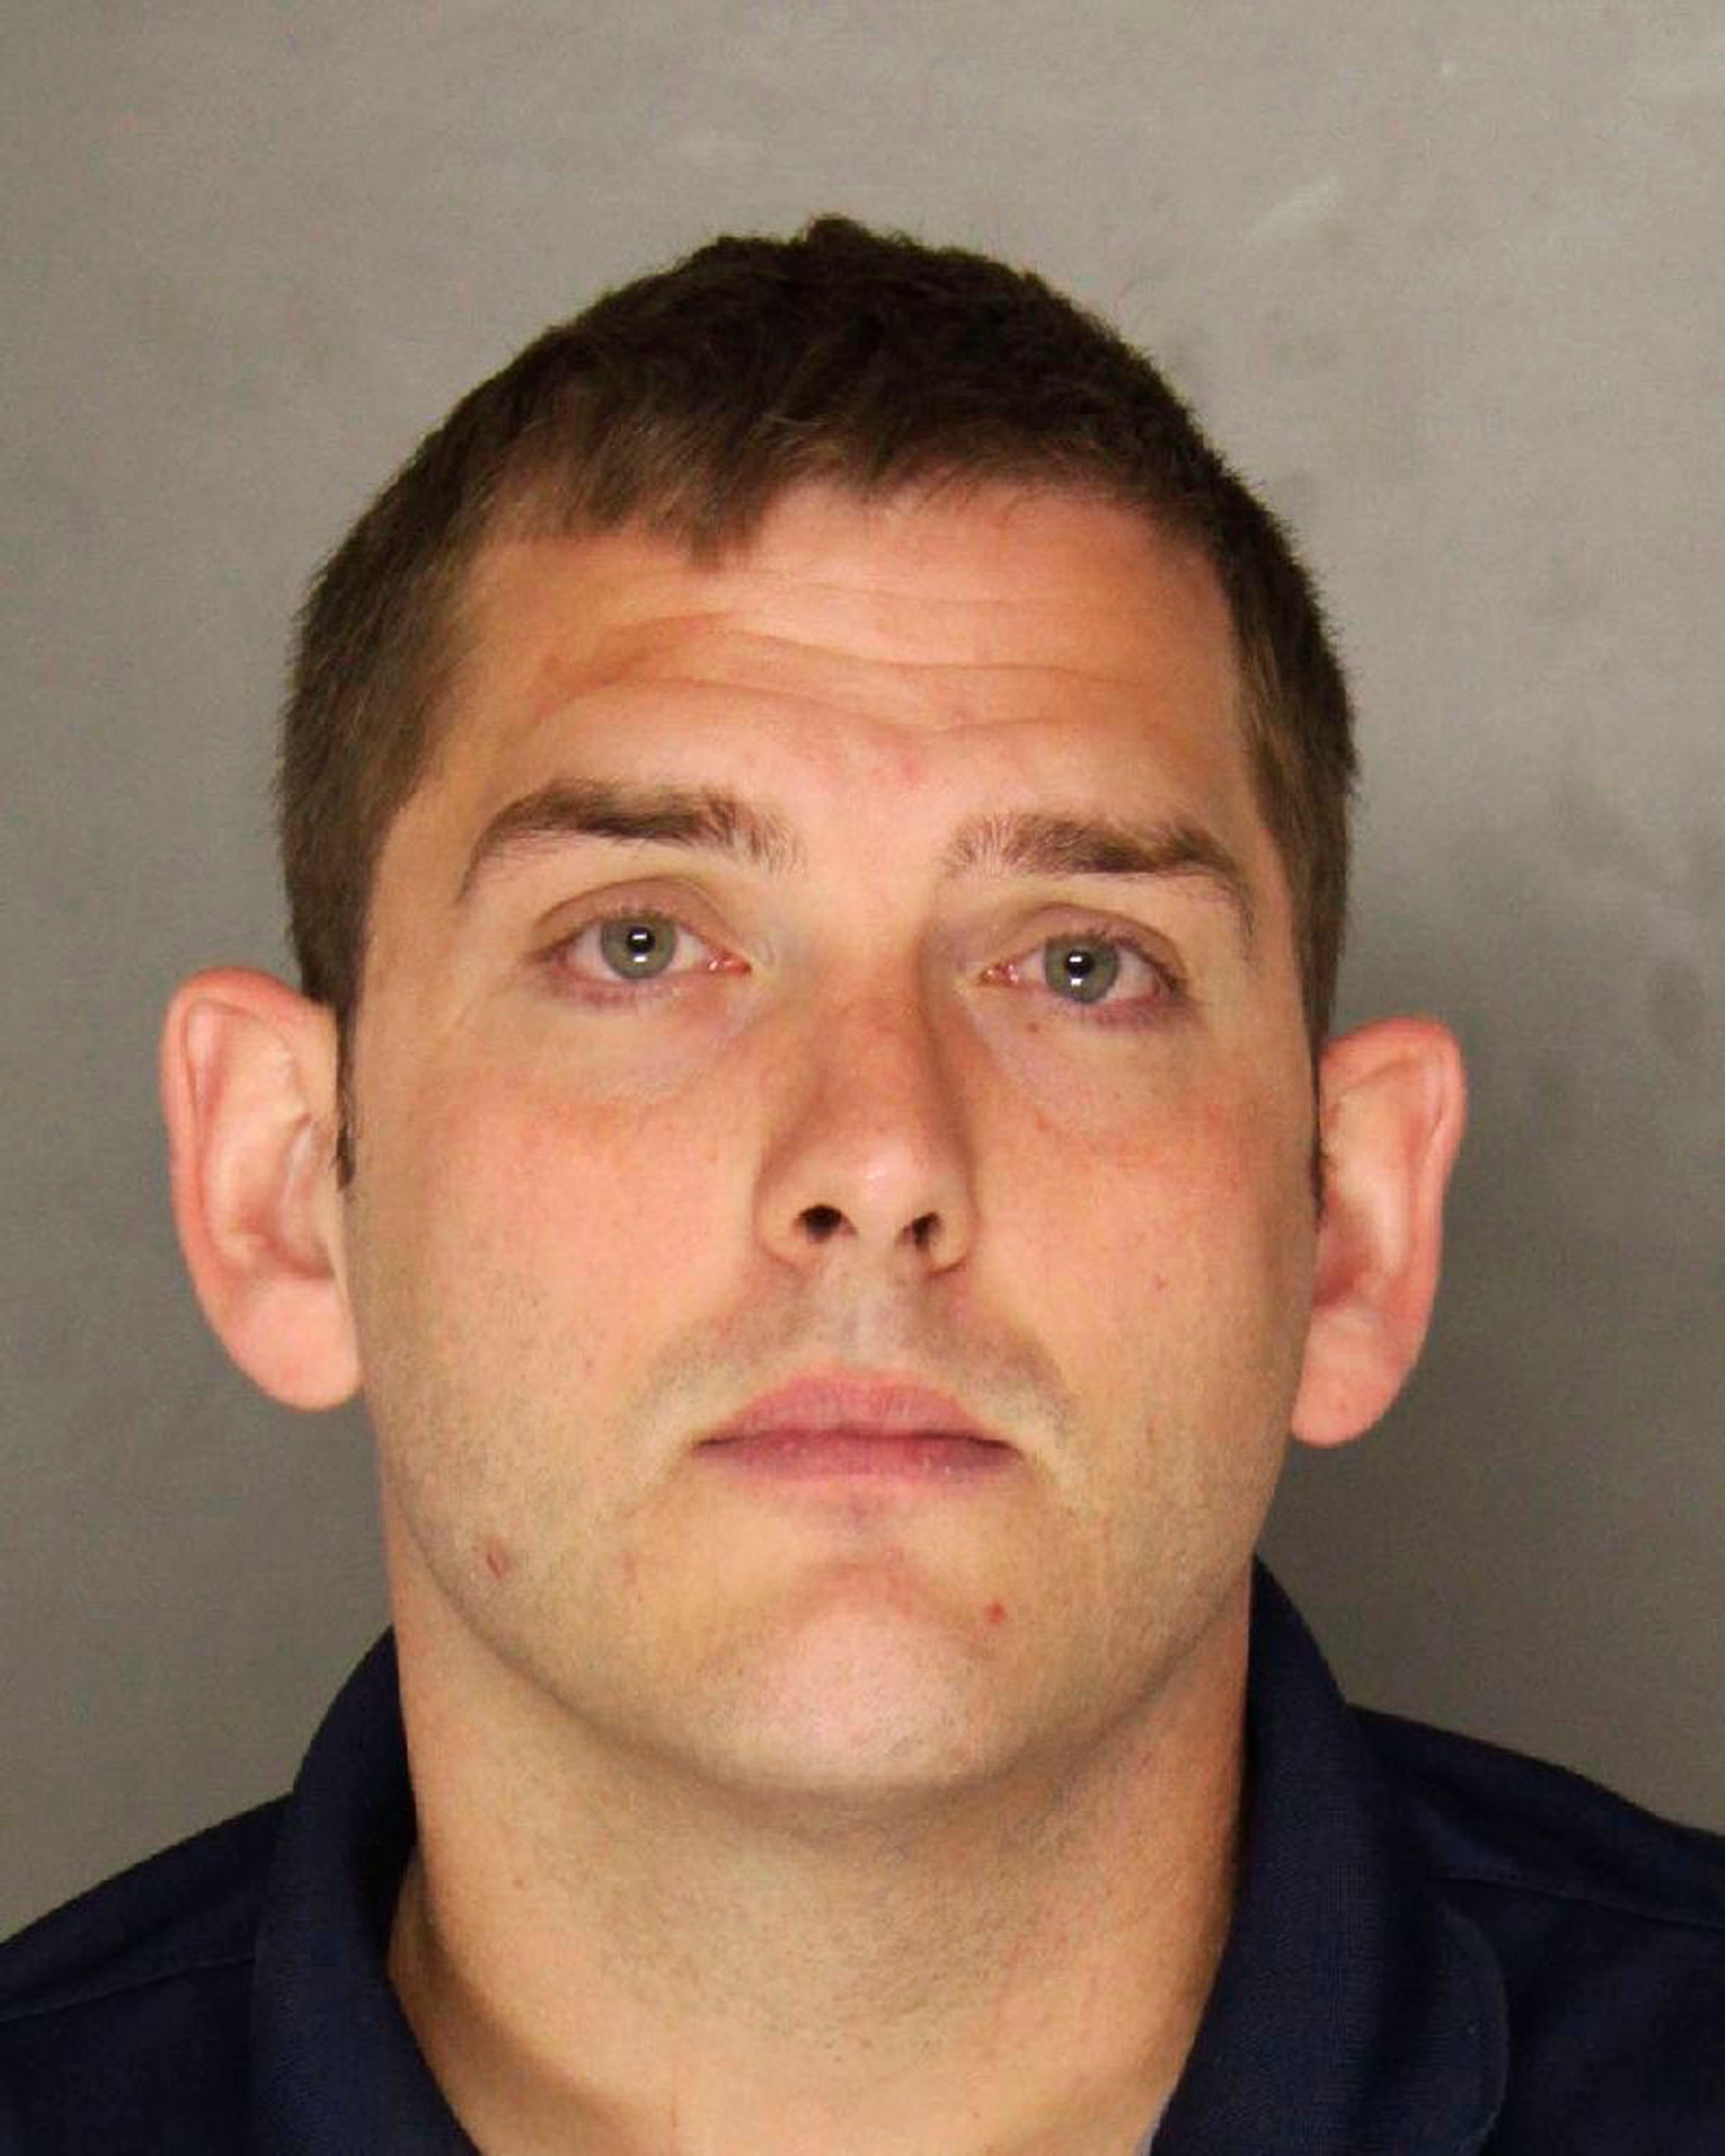 This undated photo provided by the Allegheny County District Attorney shows Michael Rosfeld, an East Pittsburgh, Pa., police officer. Rosfeld was charged with homicide, in the shooting death of Antwon Rose Jr. after a traffic stop June 19 in East Pittsburgh (AP/REX/Shutterstock)